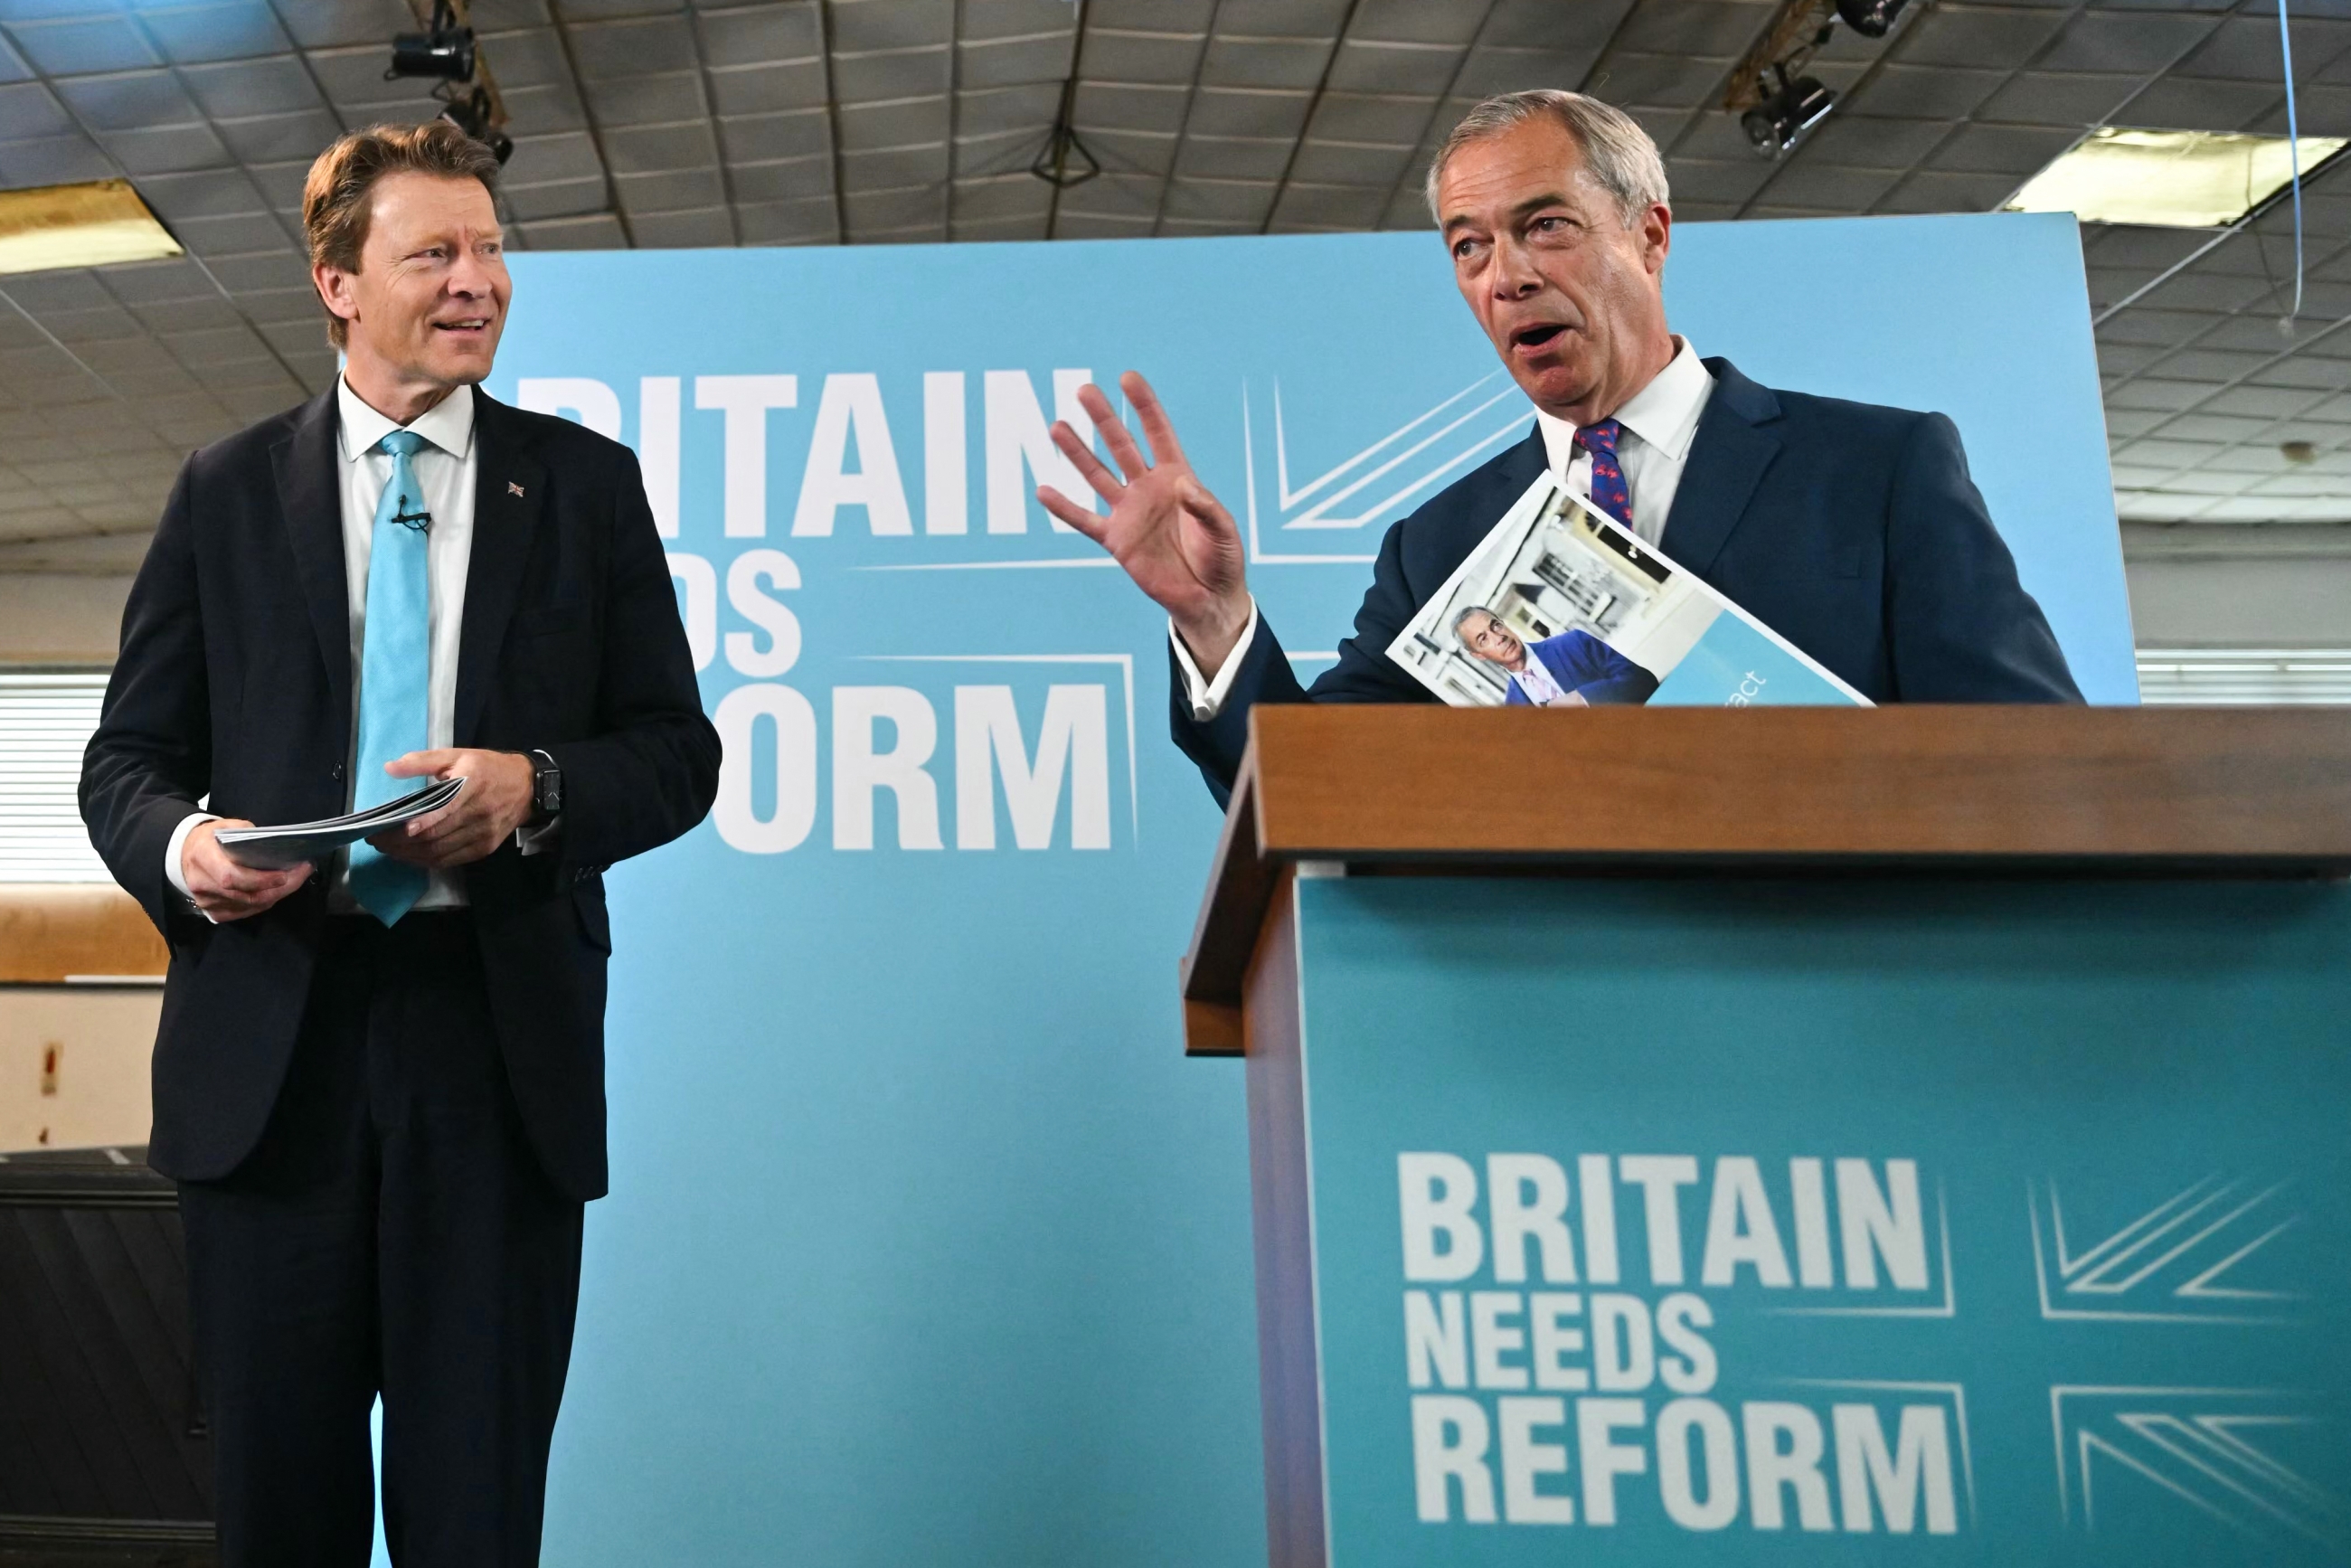 Reform UK leader Nigel Farage (right) and party chairman Richard Tice (left) at a campaign event (AFP)